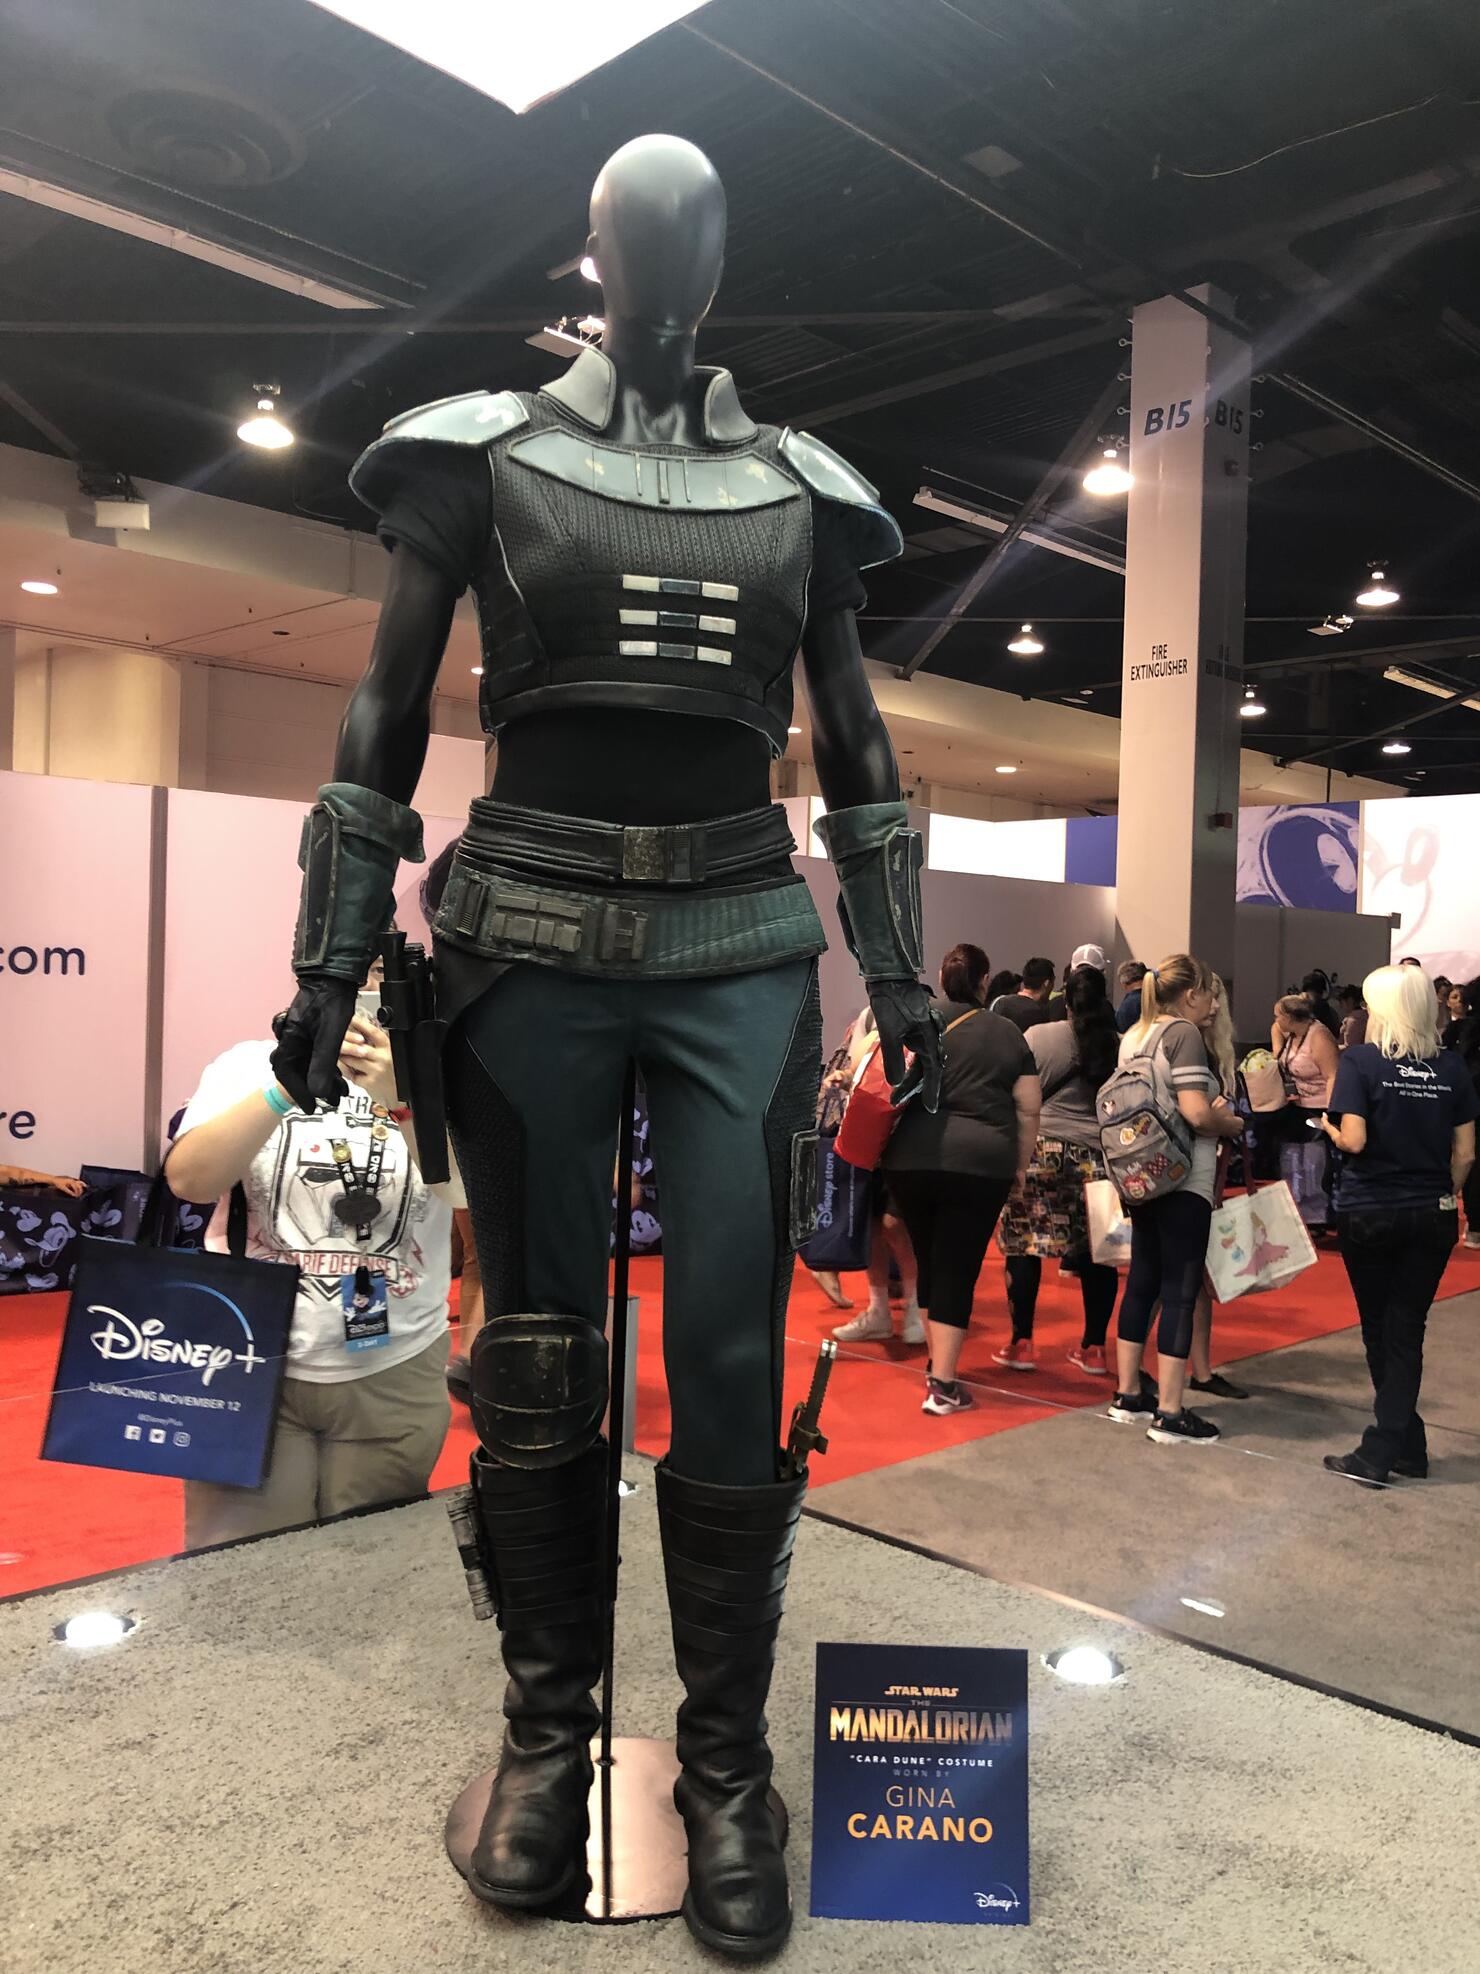 A Look at The Mandalorian's Out of This World Fan Event - D23